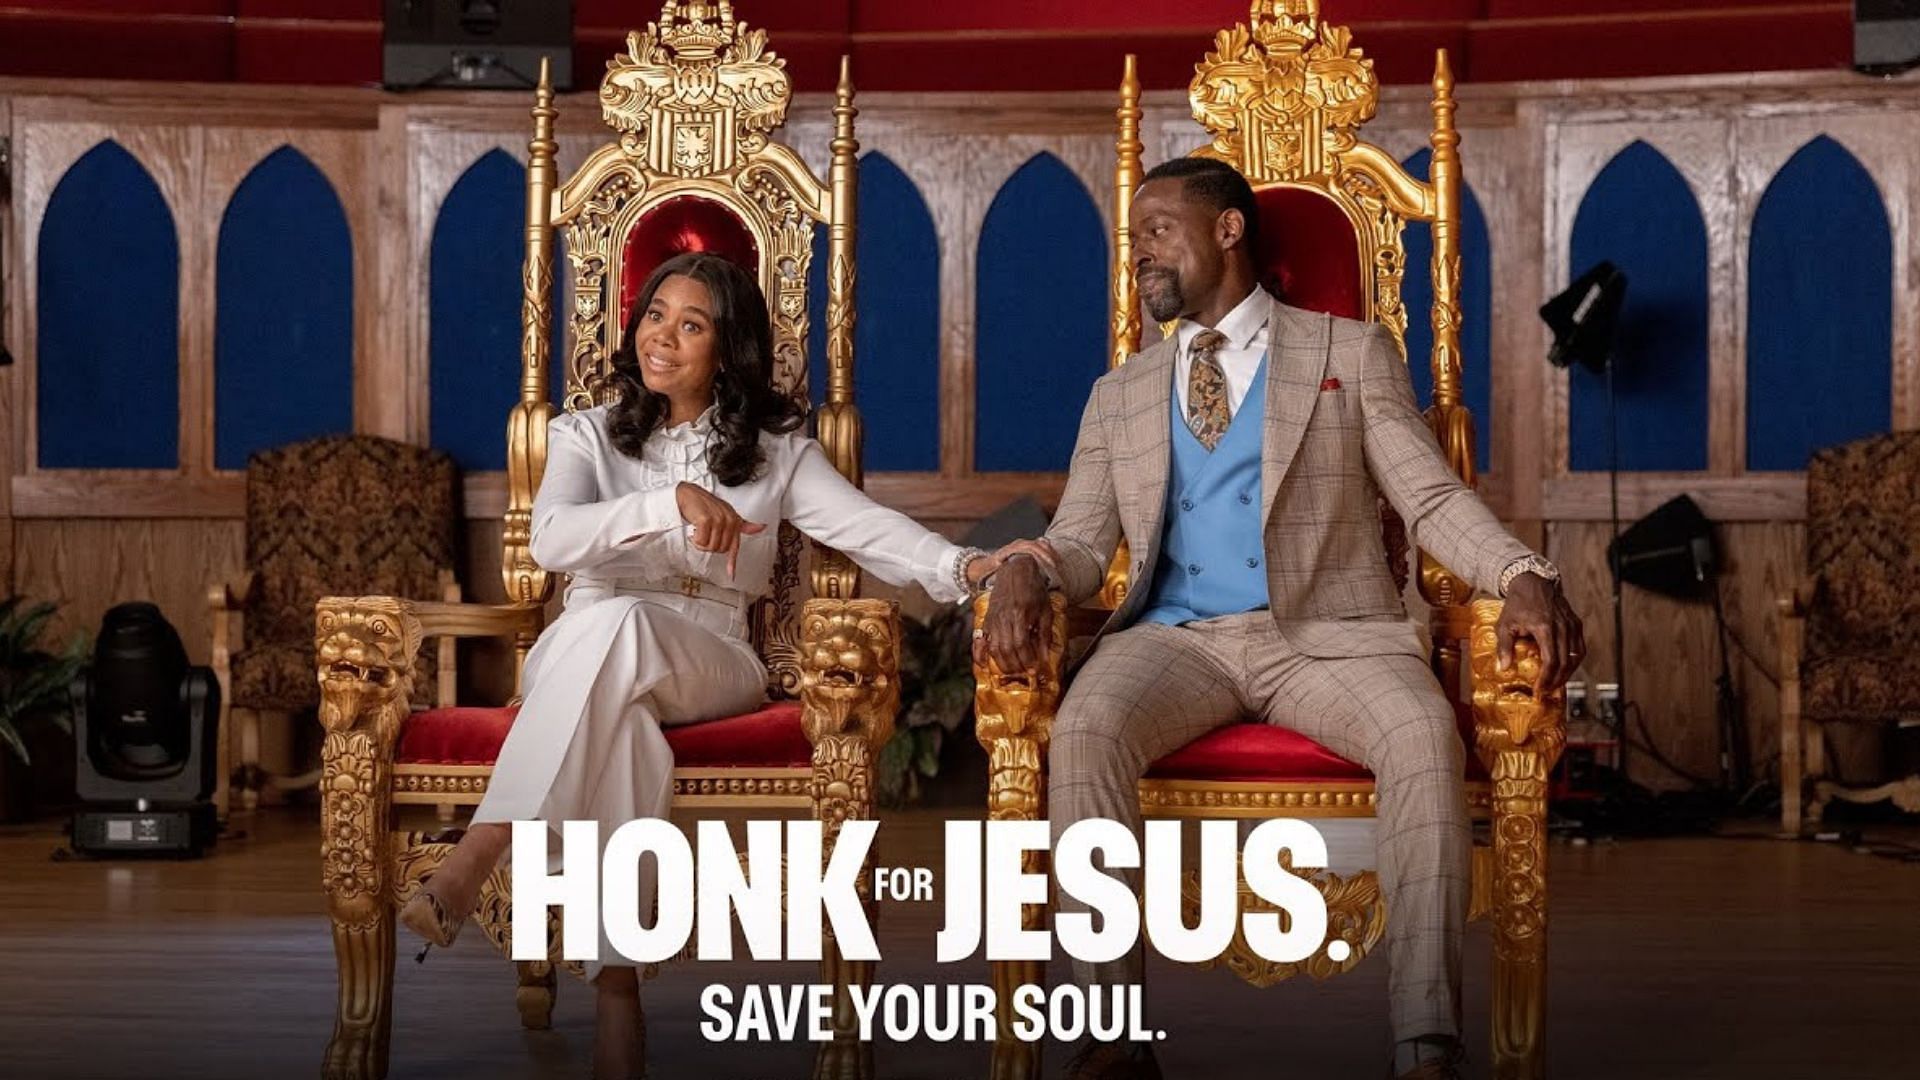 Regina Hall-starrer Honk for Jesus. Save Your Soul. premieres on Peacock this Friday, September 2, 2022 at 3:00 am ET (tentative time) (Image via Focus Features/YouTube)